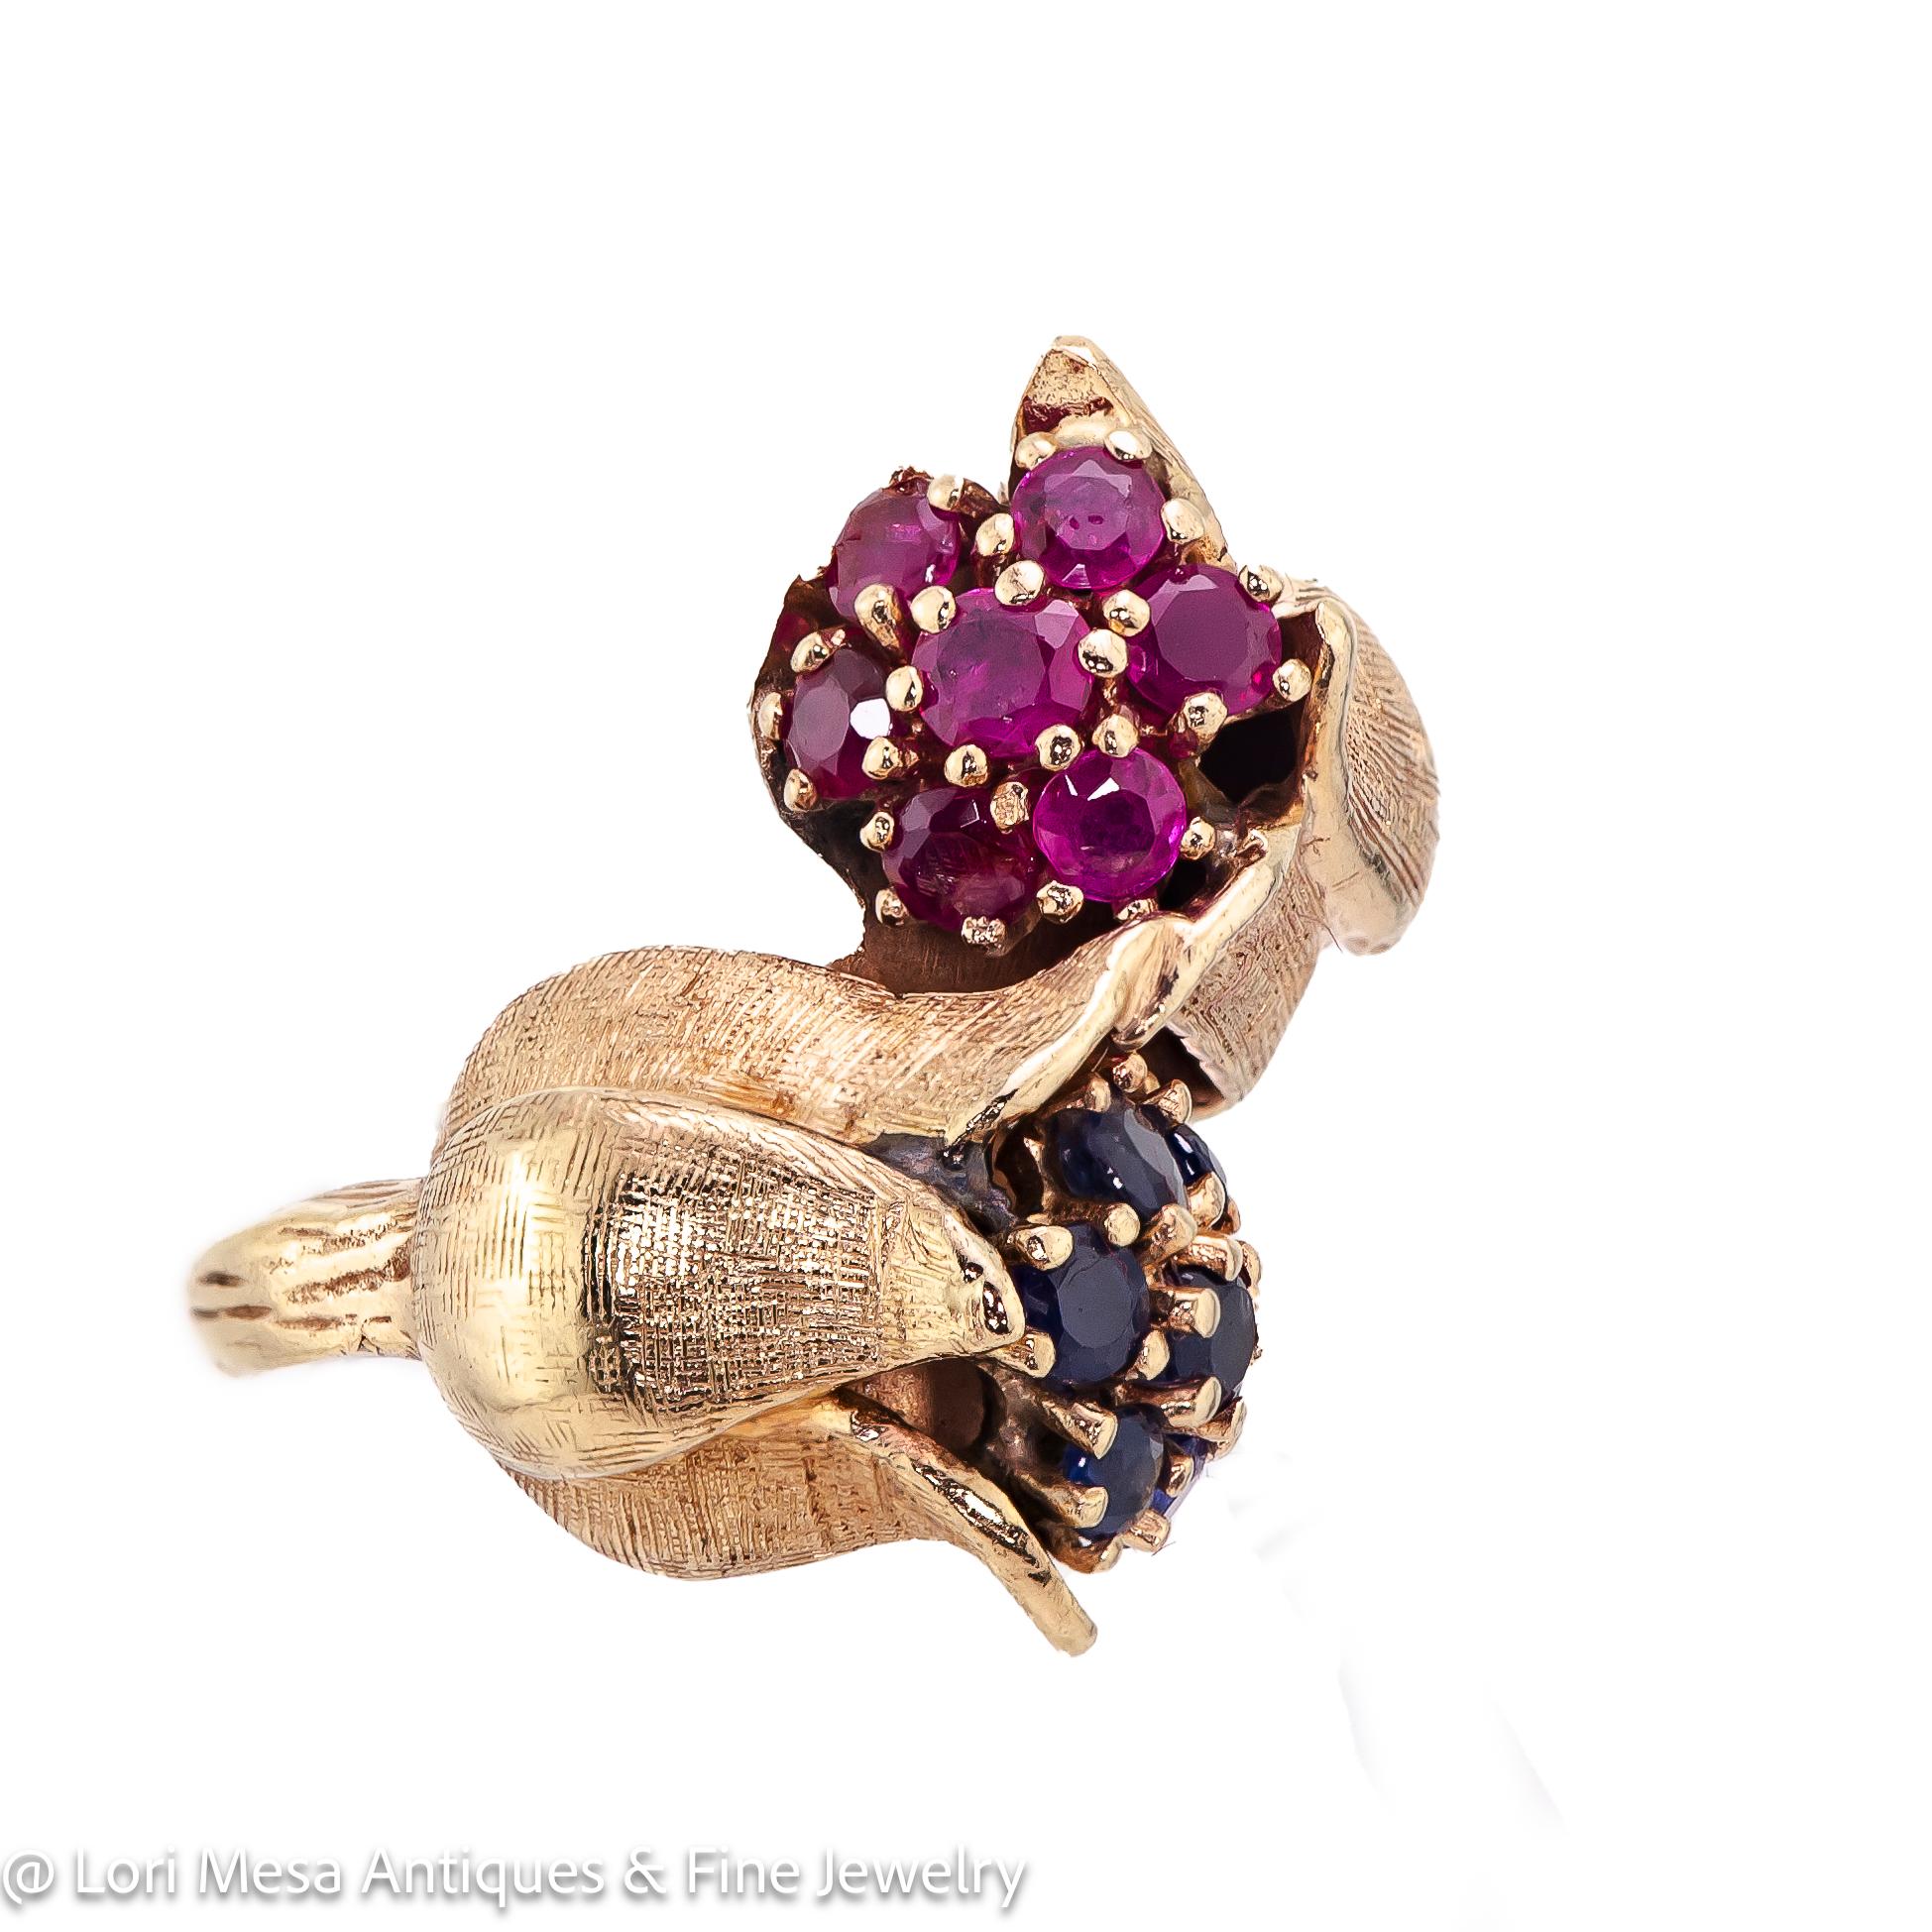 Retro 14kt yellow gold ruby and sapphire floral crossover ring cira 1940 set with seven (7) round rubies and seven (7) round sapphires prong set into a 14kt (stamped) yellow gold floral motif crossover style ring mount.